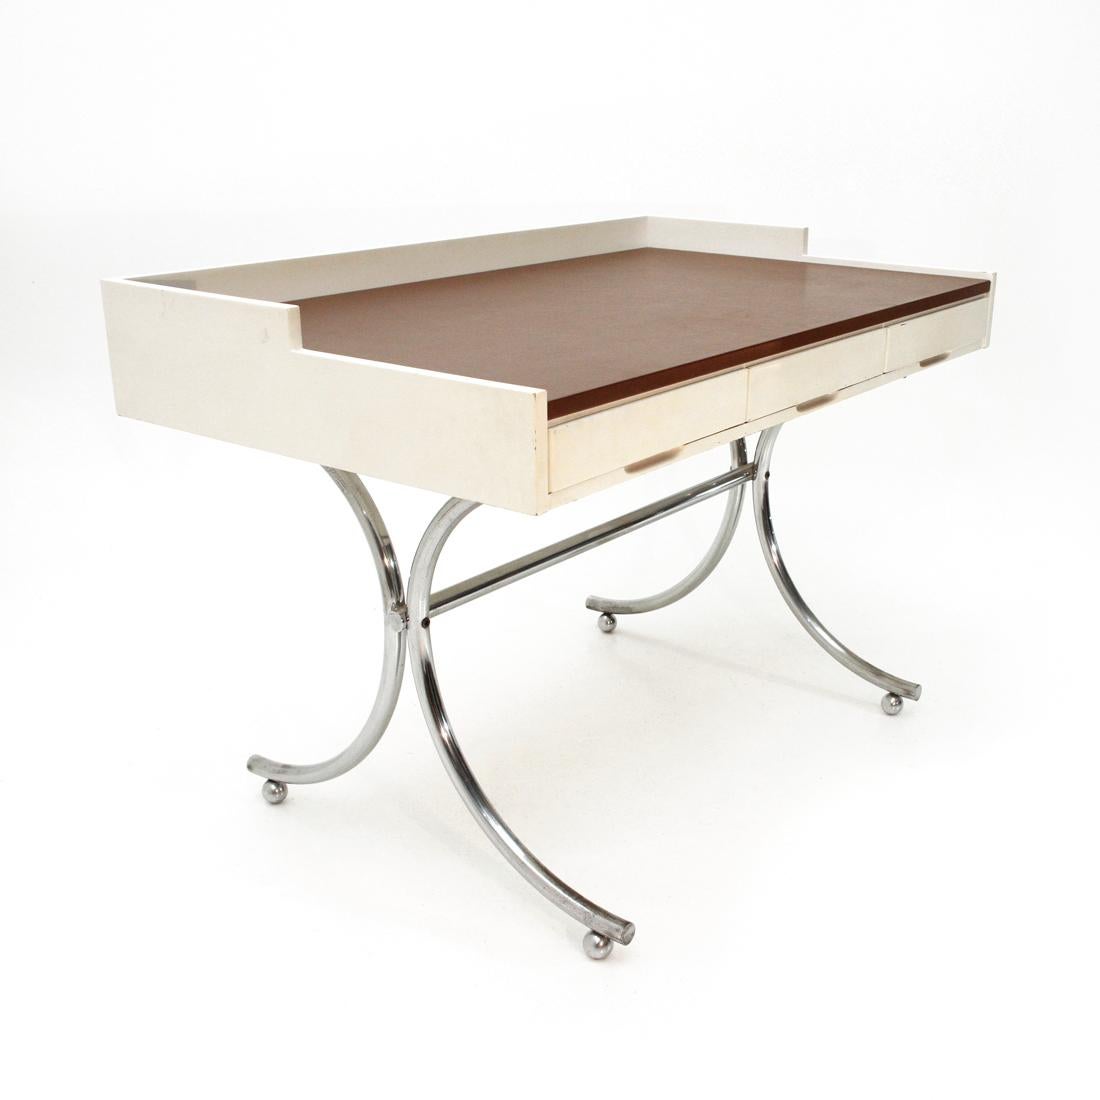 Desk produced by Adriasteia in the 1960s on a project by Annig Sarian.
Base in chromed metal.
Top in white varnished wood with three drawers and top surface covered in vinyl leather.
Good general conditions, some signs and traces of rust due to